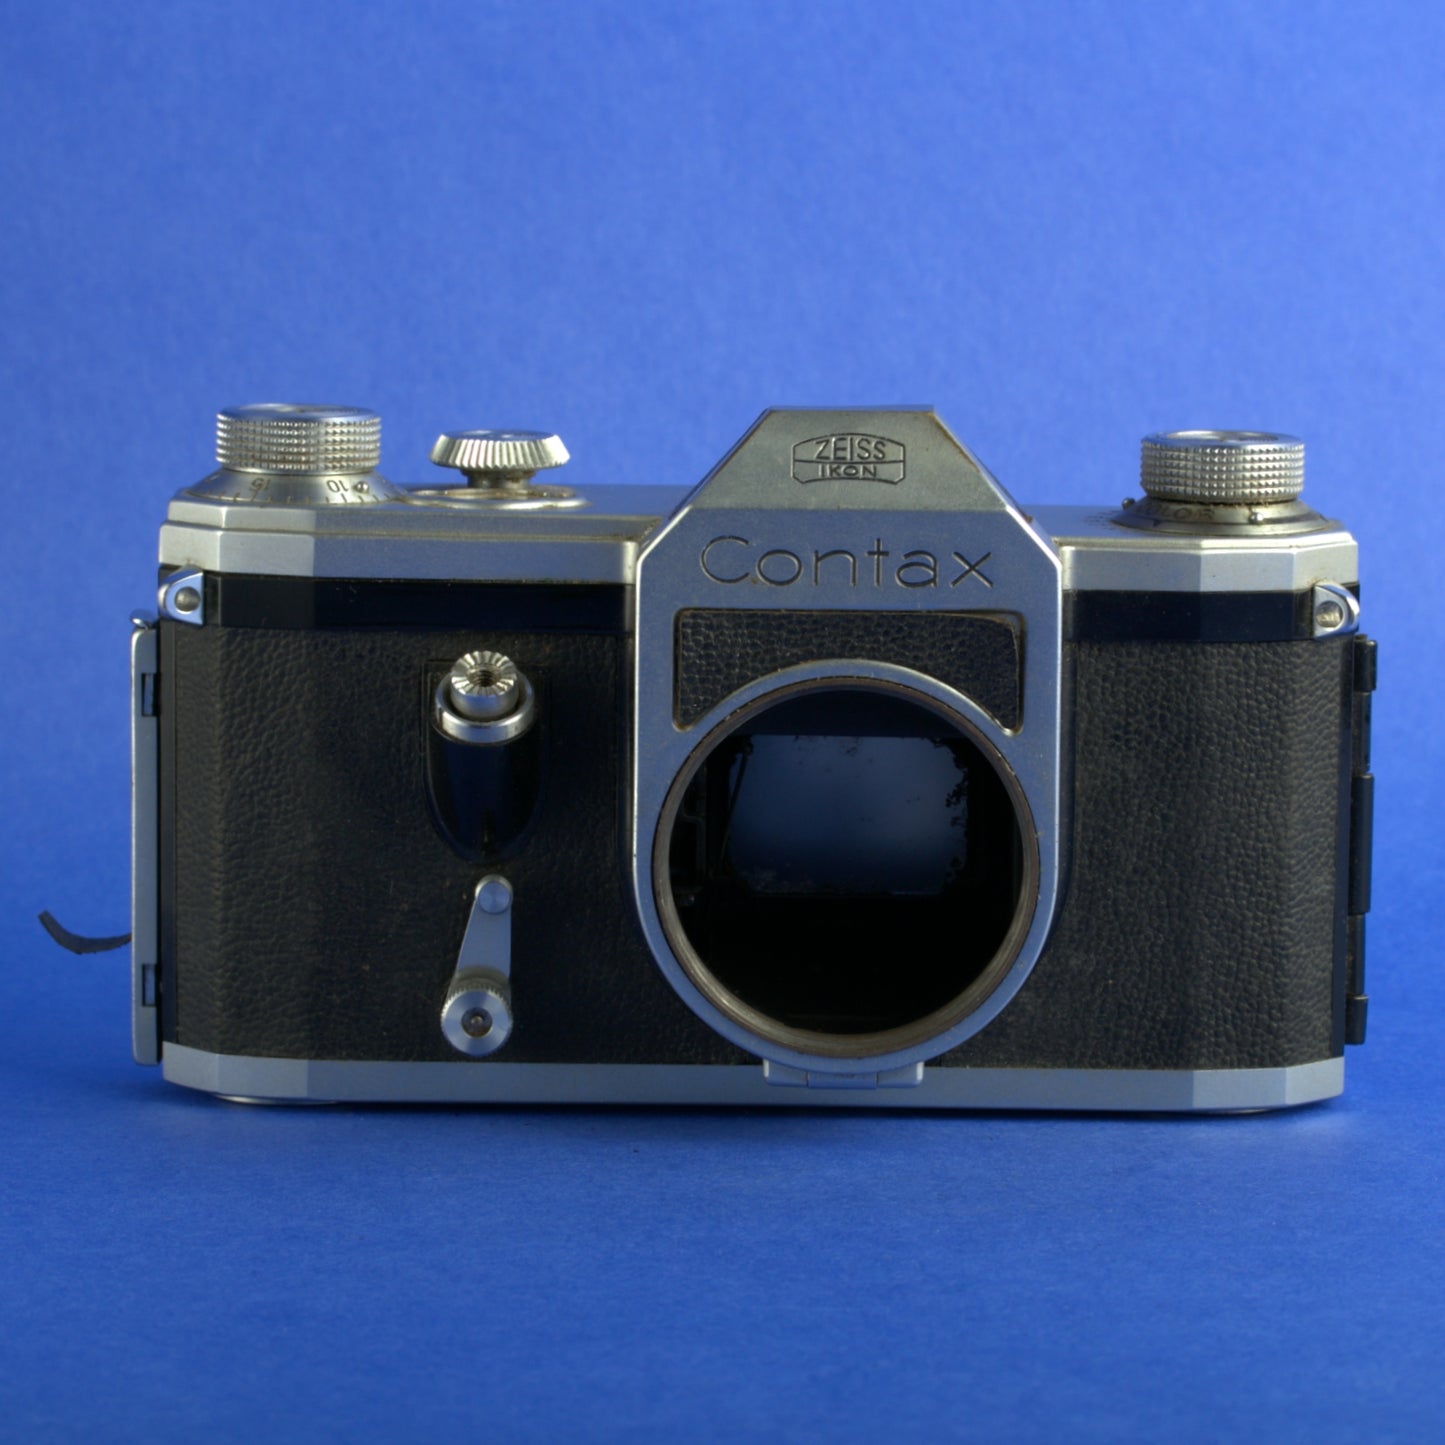 Contax S Film Camera with Biotar Lens Not Working